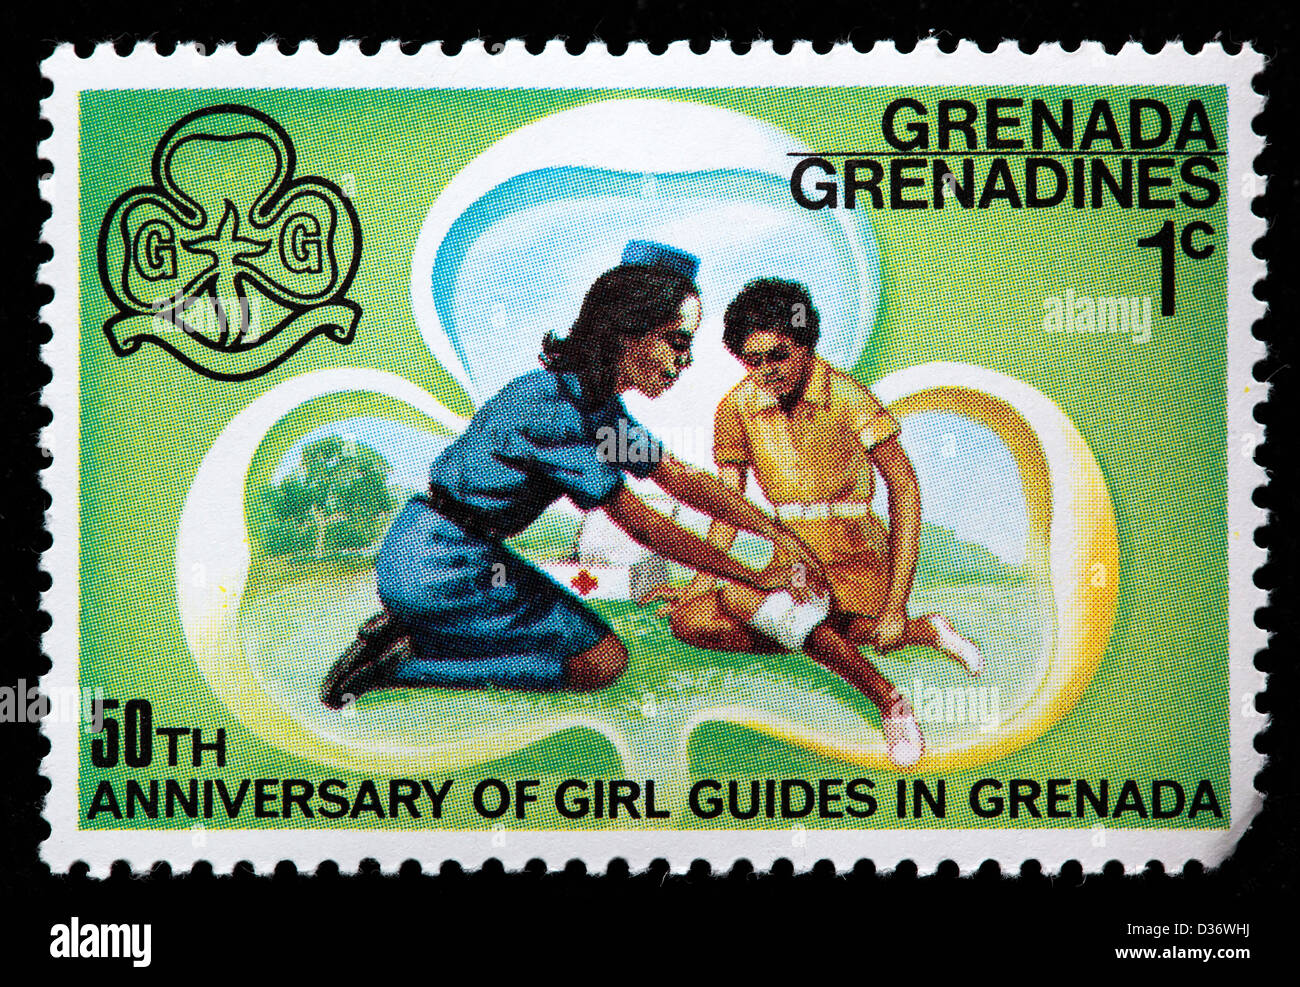 50th anniversary of girl guides, postage stamp, Grenada Grenadines, 1976 Stock Photo